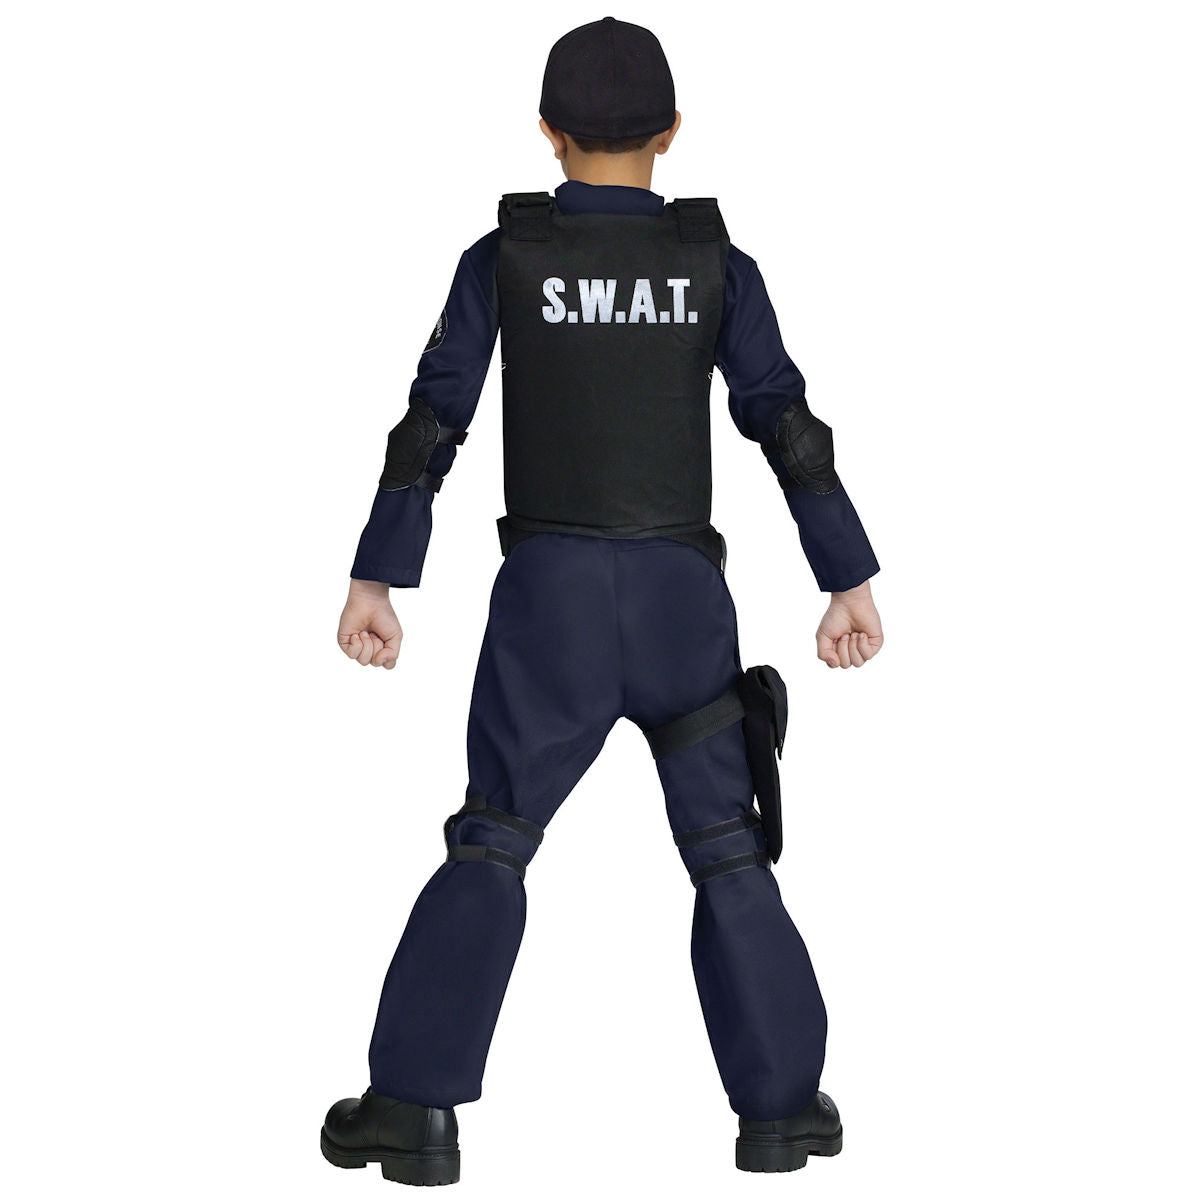 S.W.A.T. Commando Deluxe Boy's Costume includes Belt and Holster